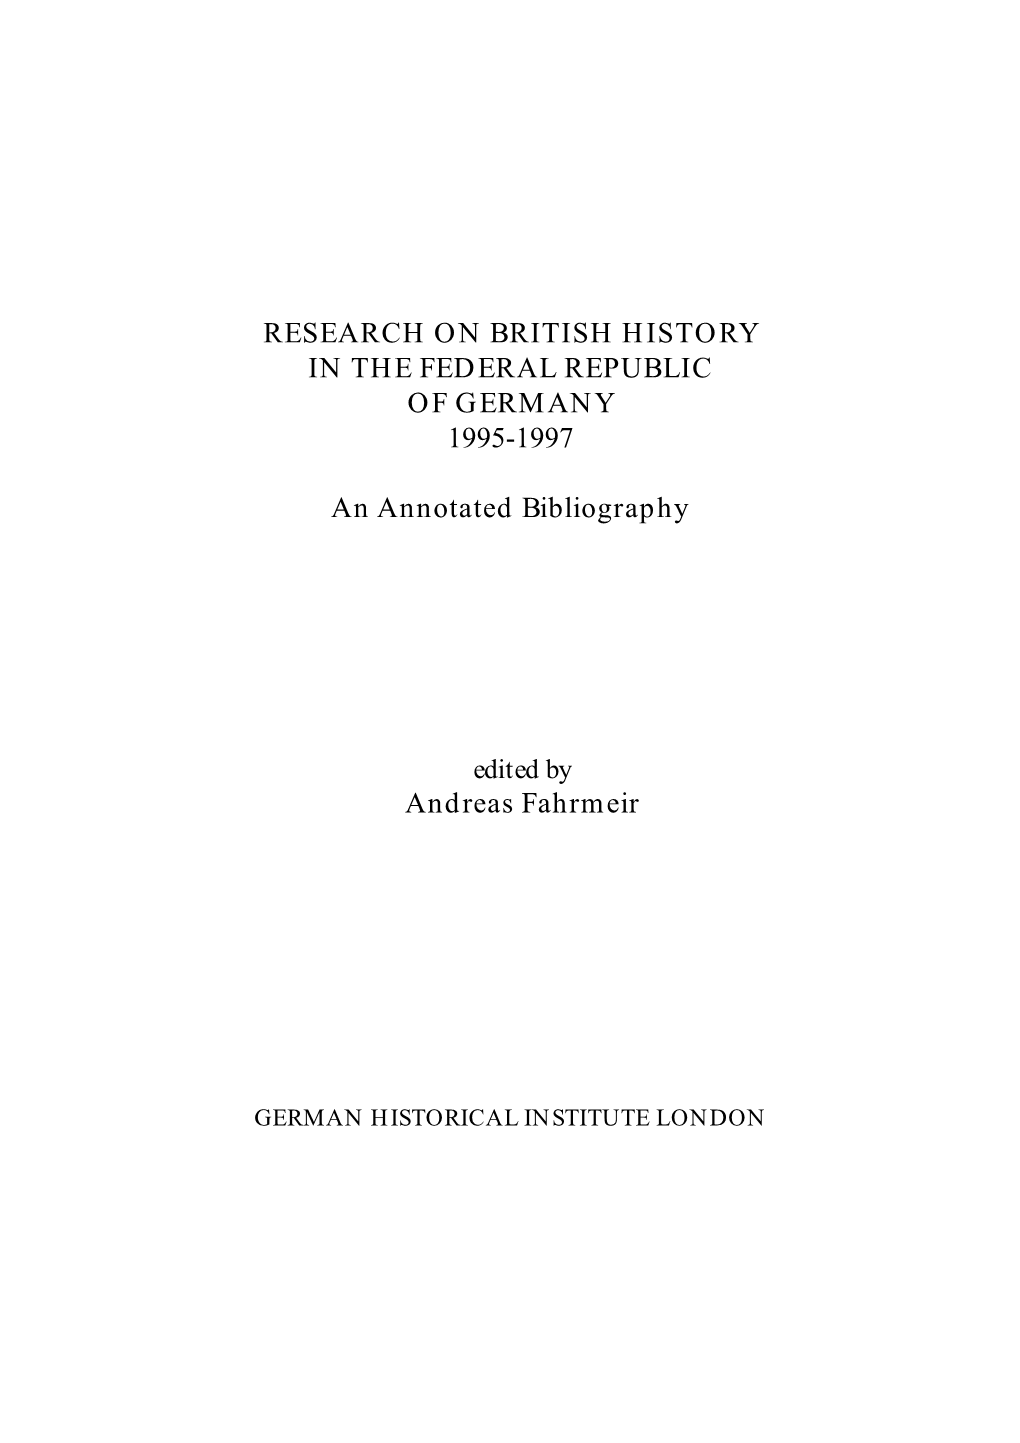 Research on British History in the Federal Republic of Germany 1995-1997